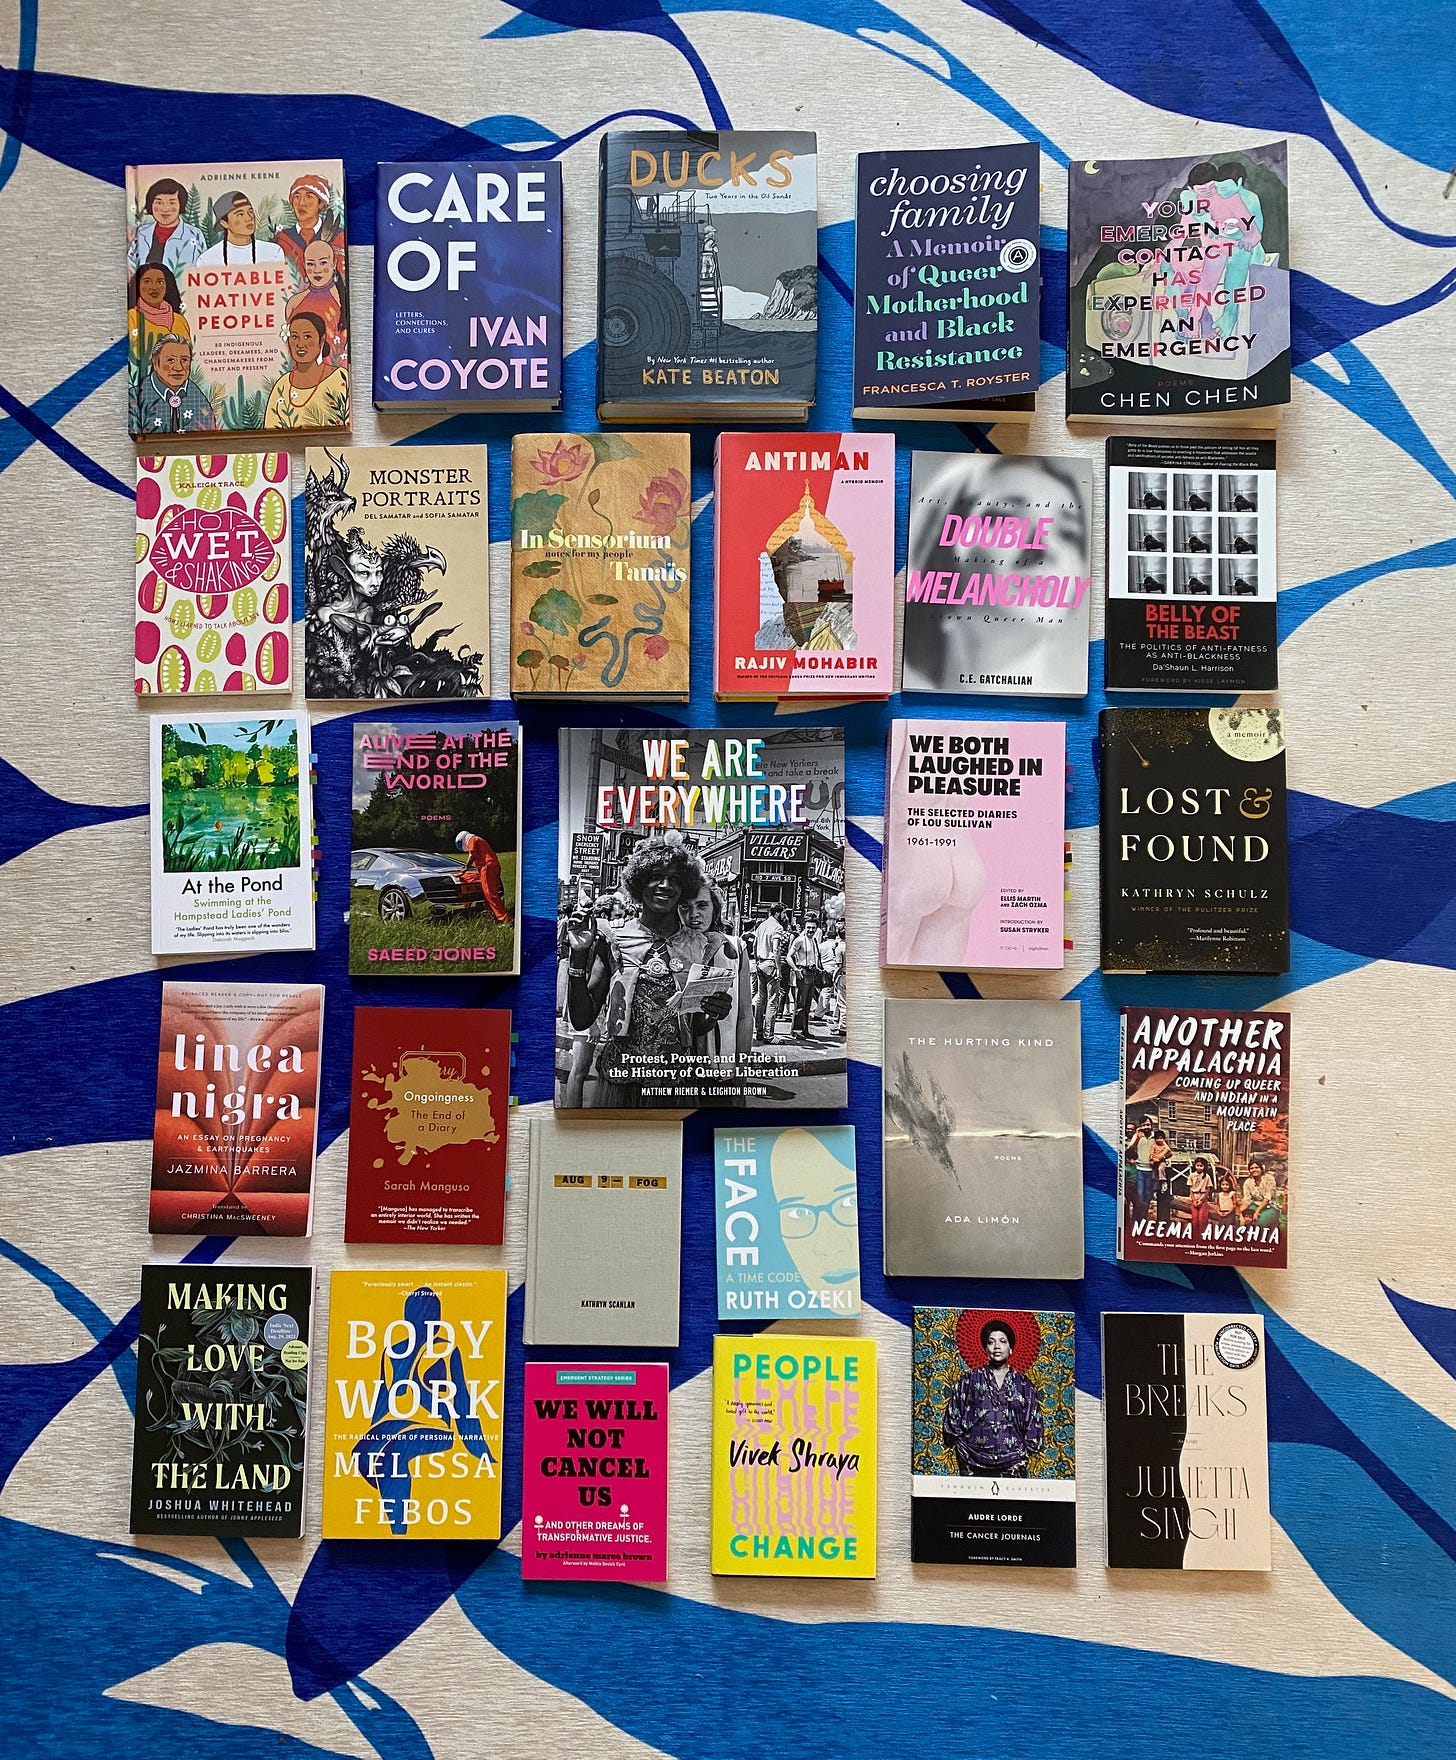 A selection of the listed books arranged in a grid on a blue and white rug.